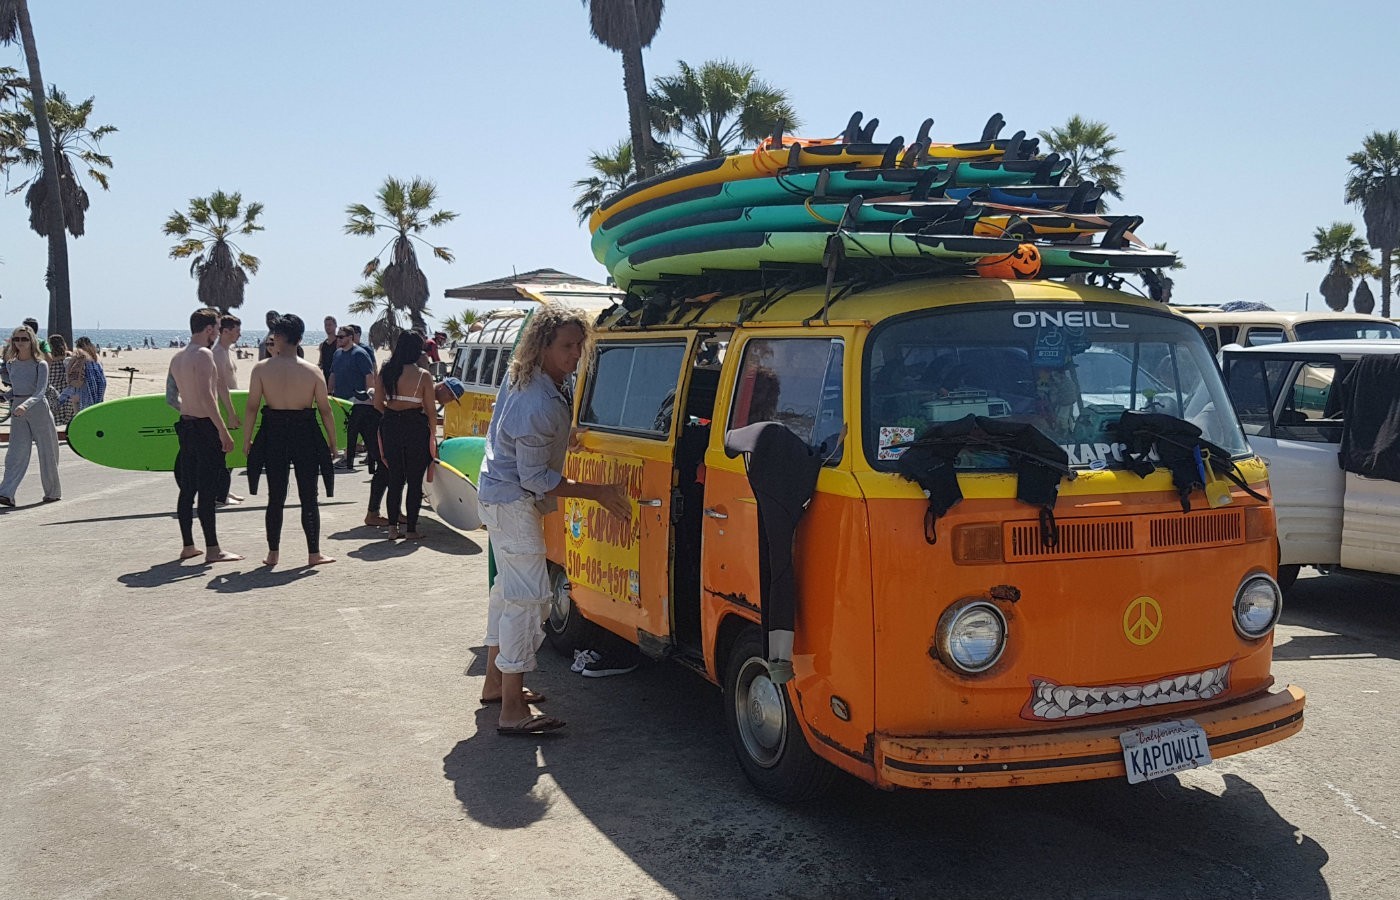 Lincolnshire campervan rental company sponsors Olympic Surfing event